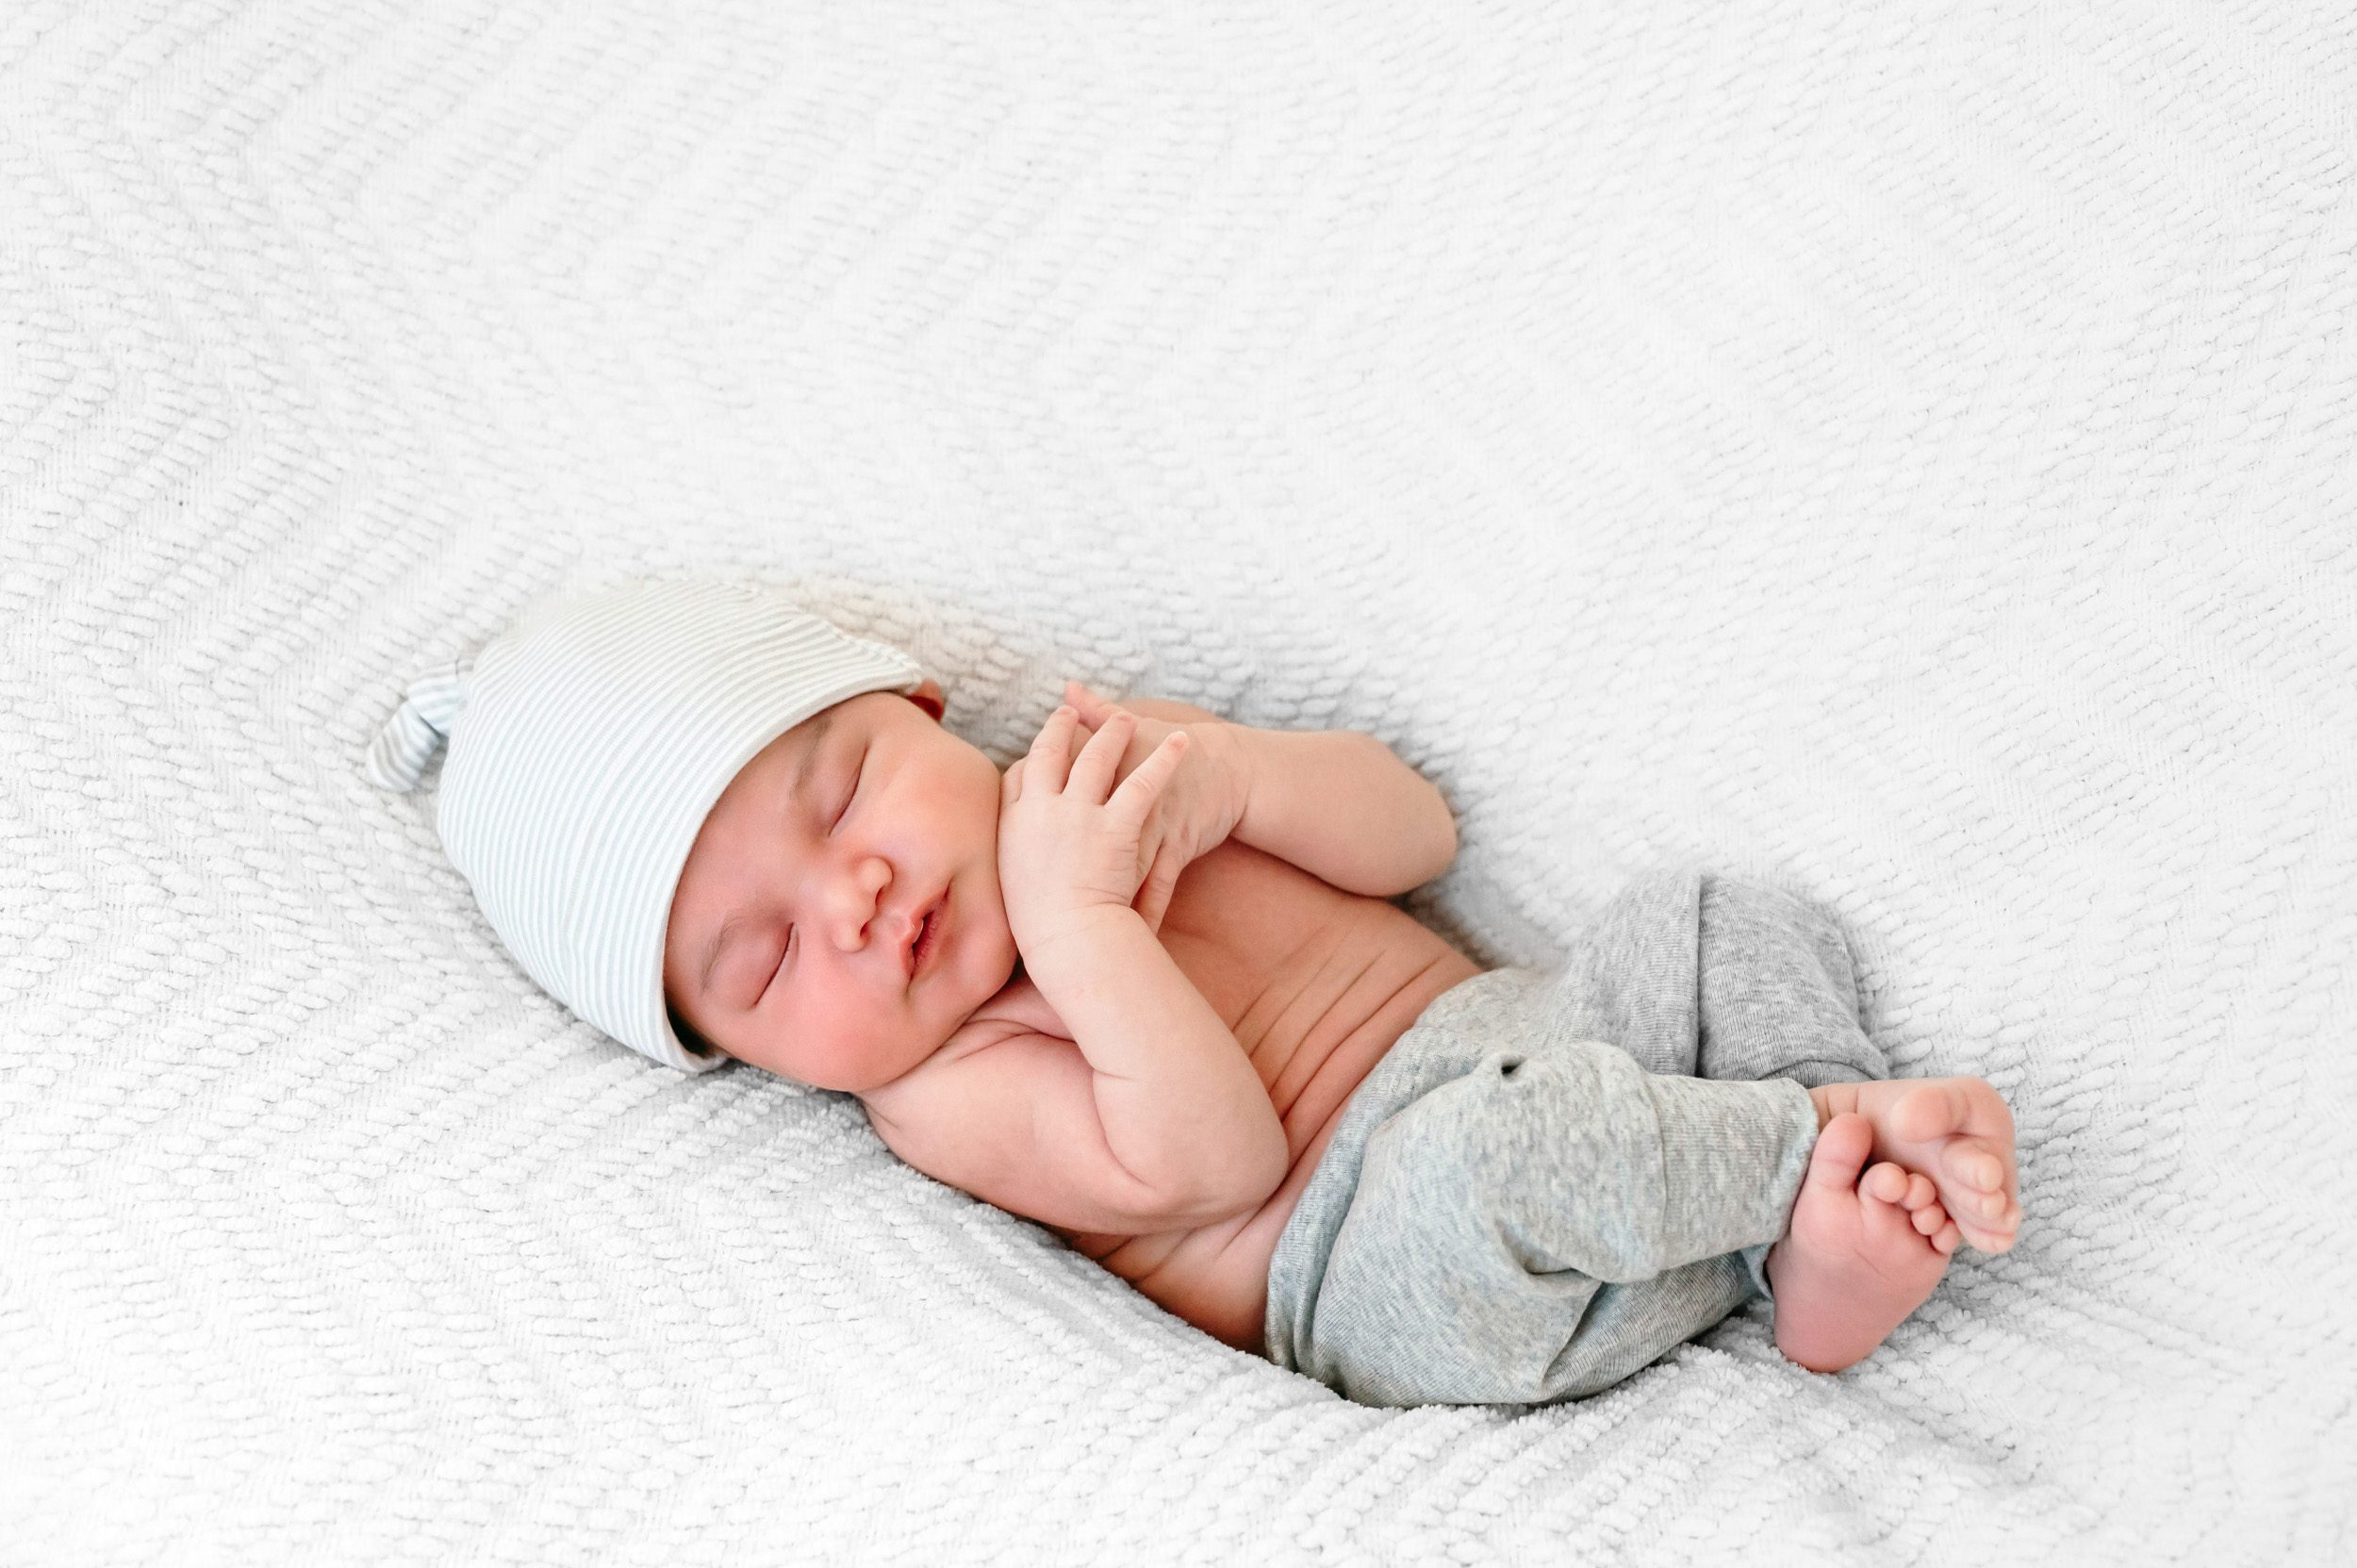 a newborn baby boy sleeping with his arms and legs tucked in close to his body during an in home newborn photoshoot